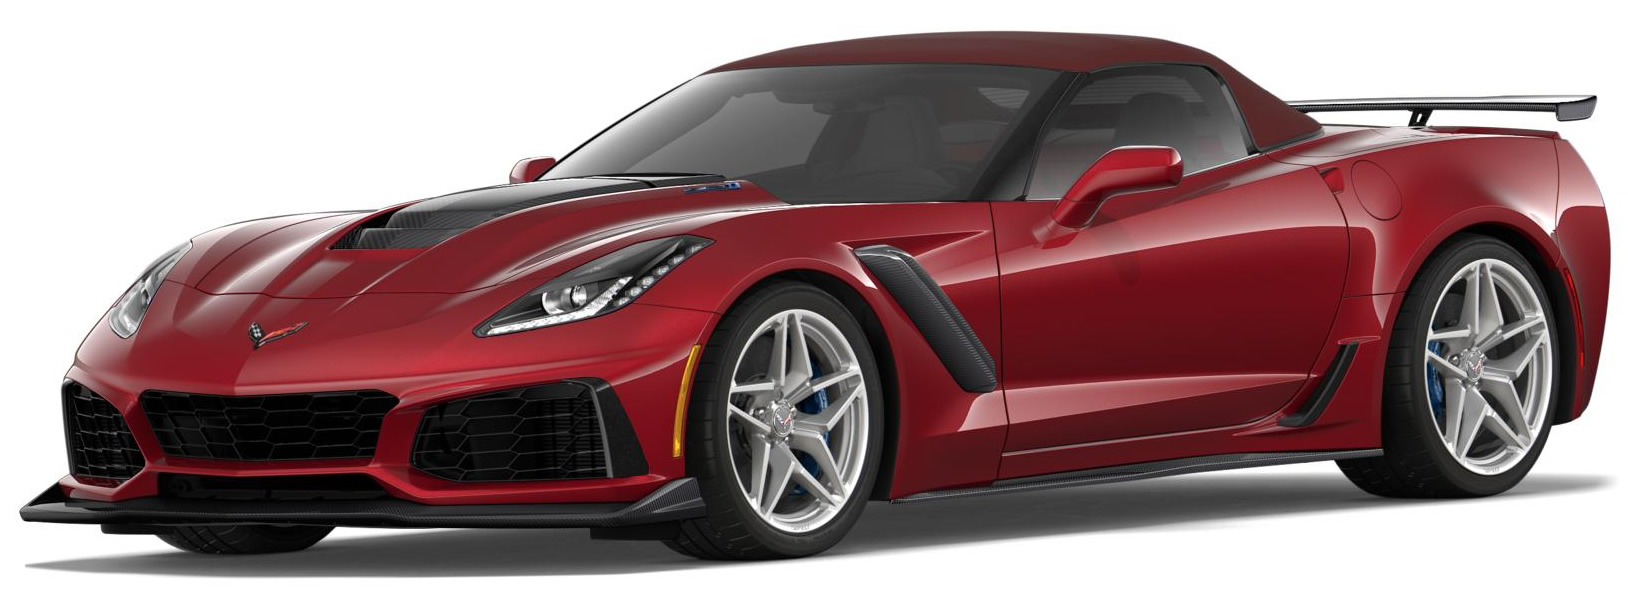 2019 Corvette ZR1 Convertible in Long Beach Red Metallic with the Spice Red Top